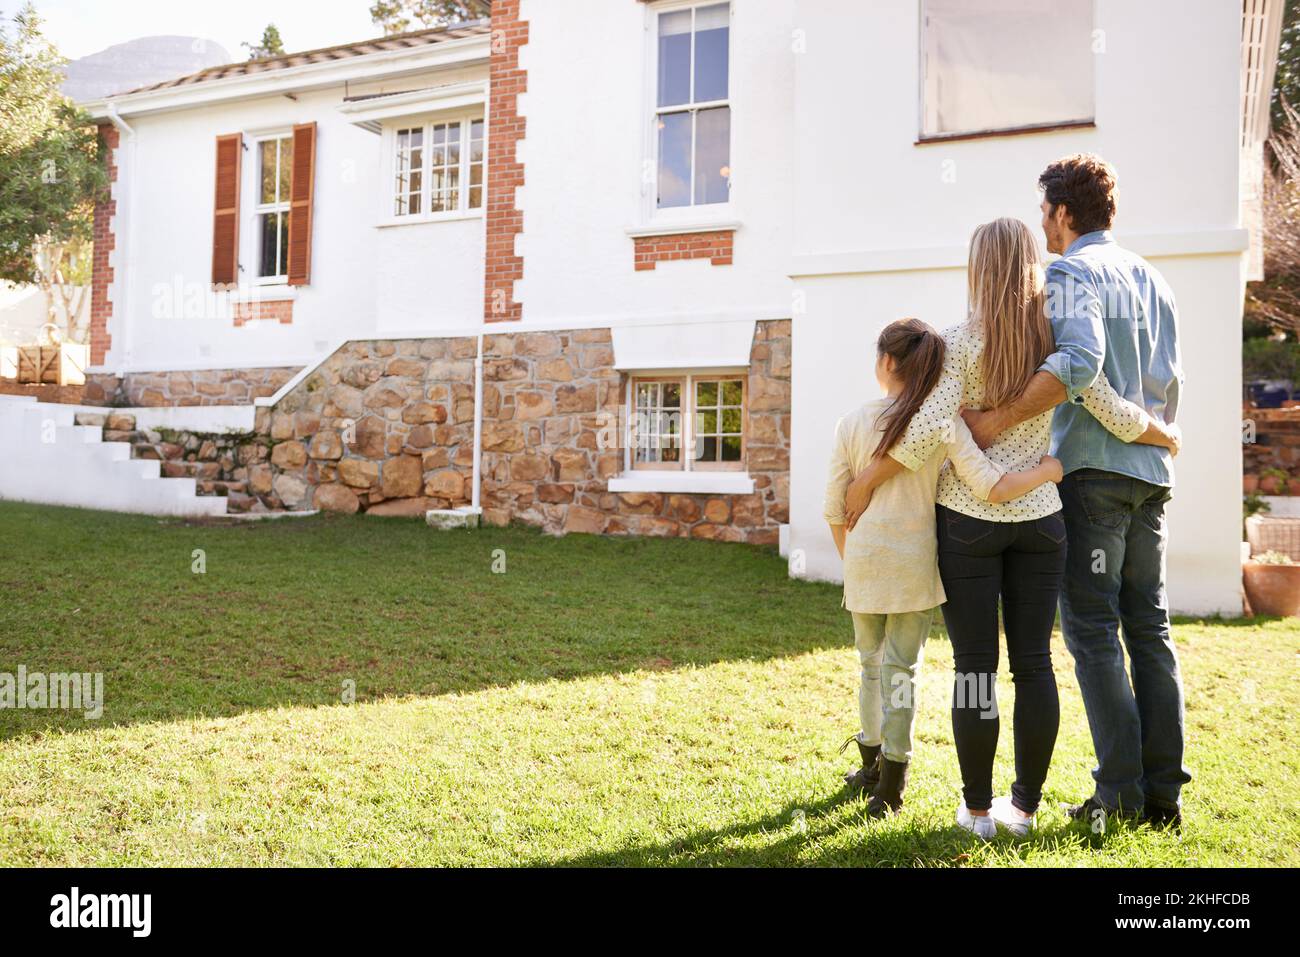 Not just a house, but a home. A family standing outdoors admiring their new home. Stock Photo